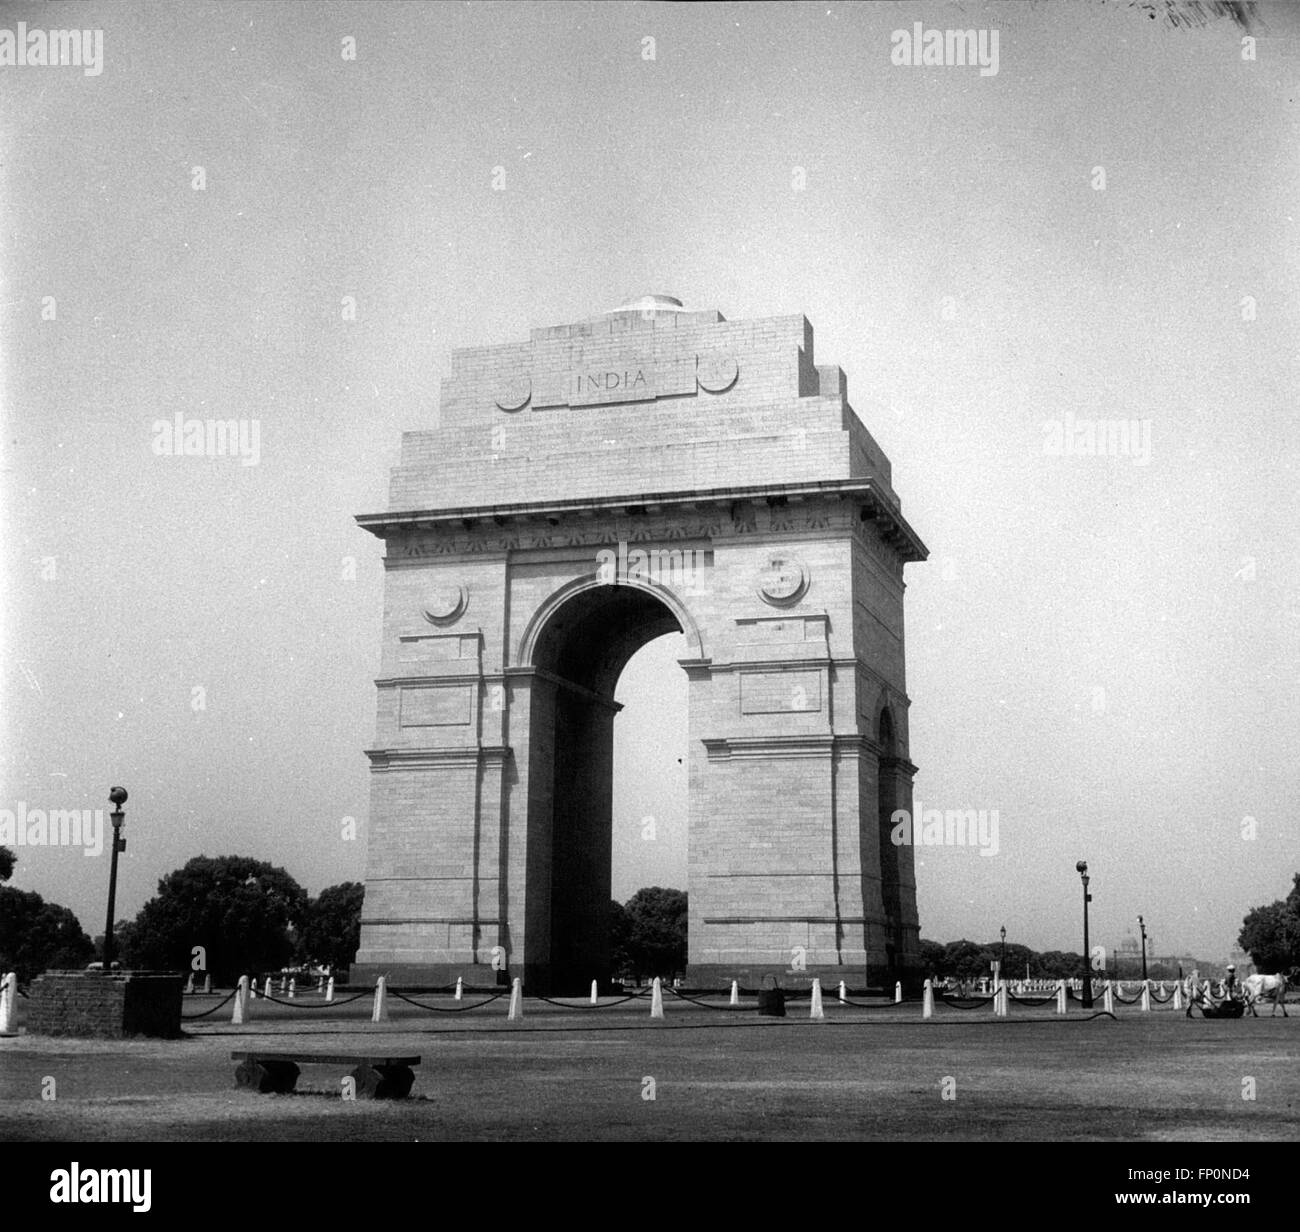 1962 - To The Memory Of The Dead Of Two World Wars: The War Memorial in New Delhi. © Keystone Pictures USA/ZUMAPRESS.com/Alamy Live News Stock Photo